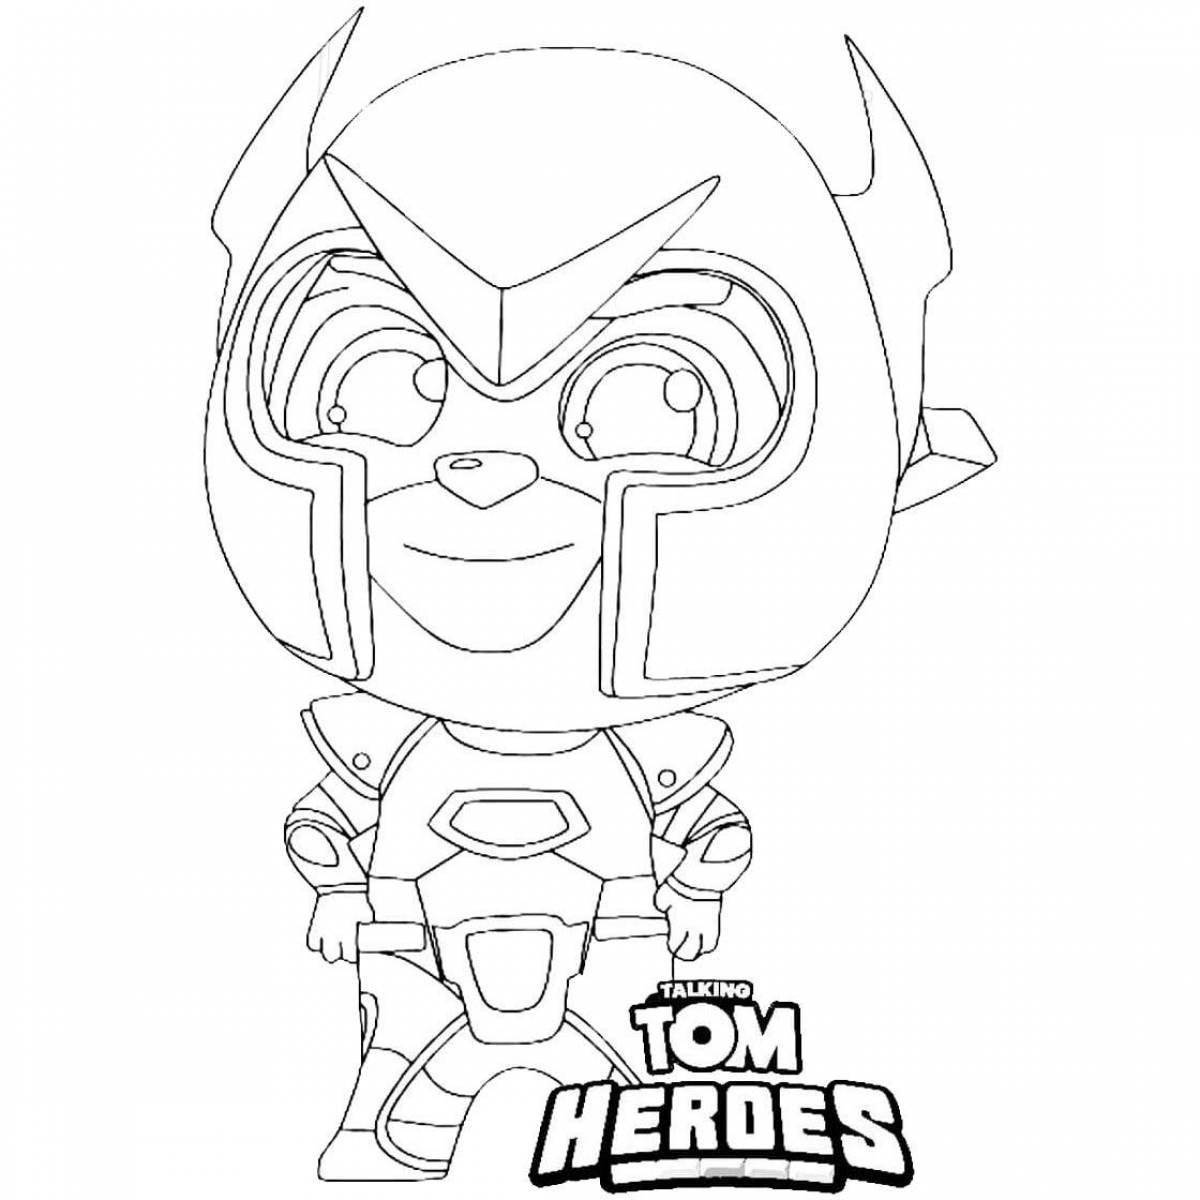 Charming tom hero coloring page